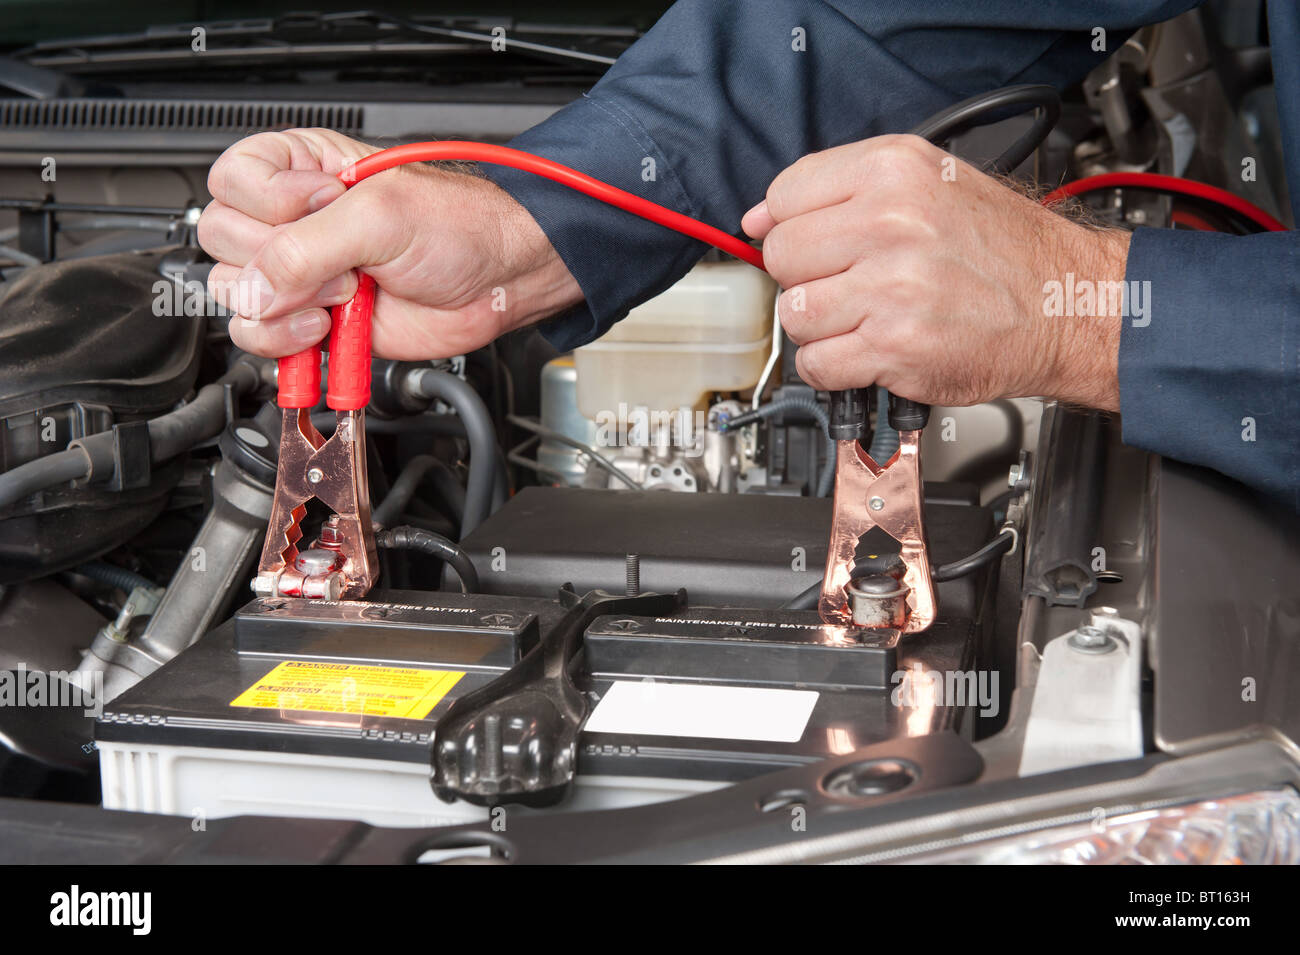 A car mechanic uses battery jumper cables to charge a dead battery. Stock Photo